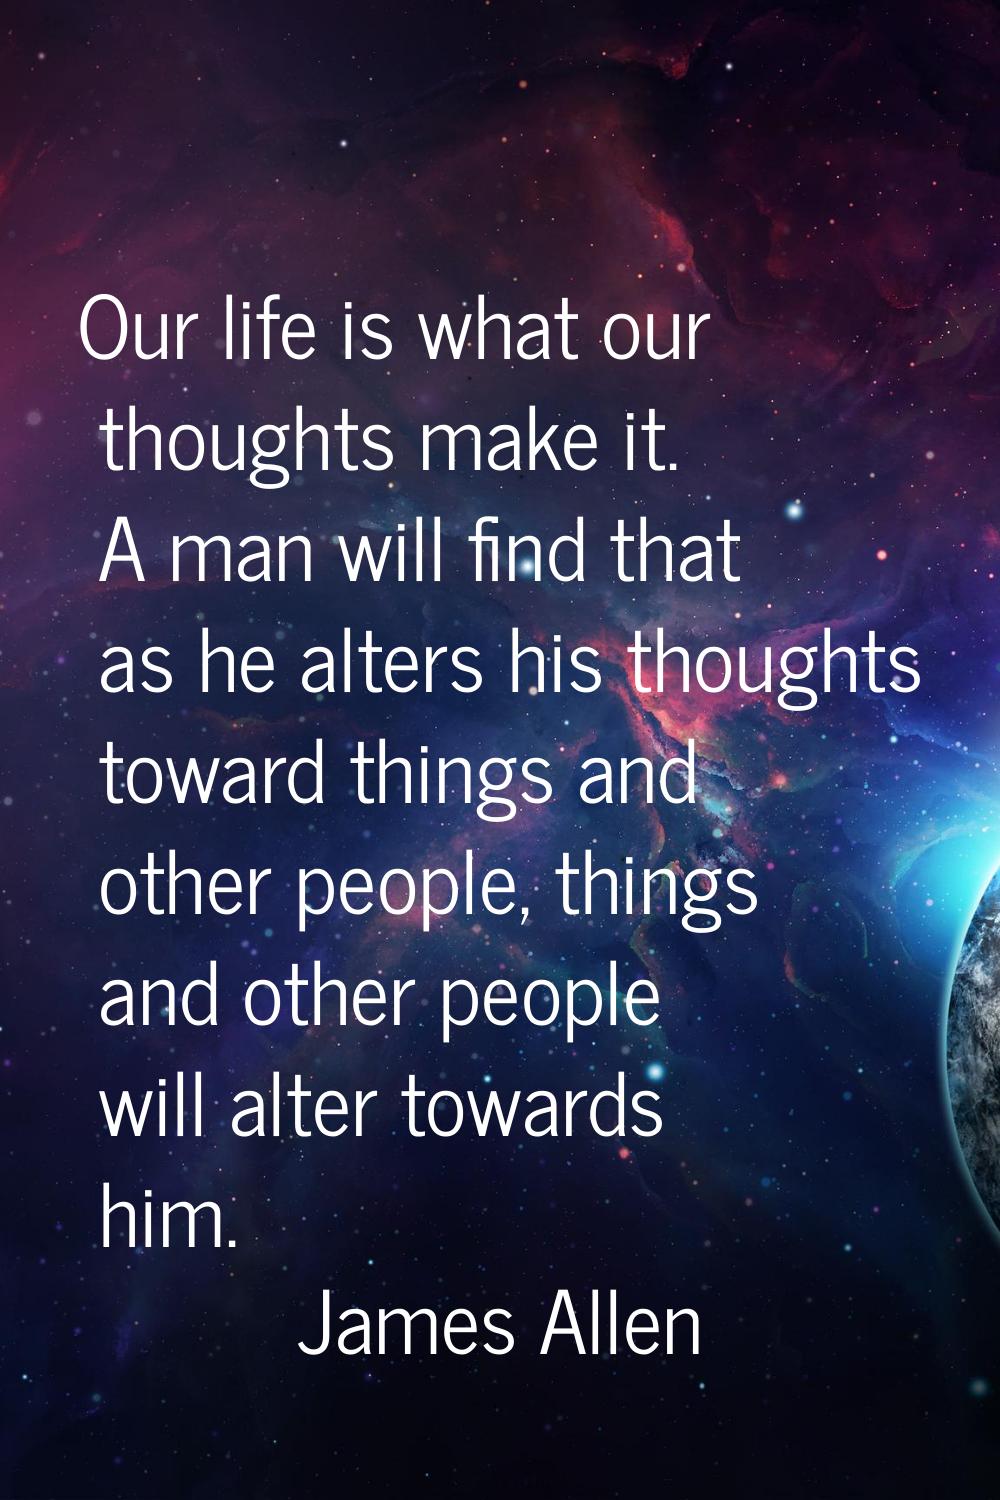 Our life is what our thoughts make it. A man will find that as he alters his thoughts toward things